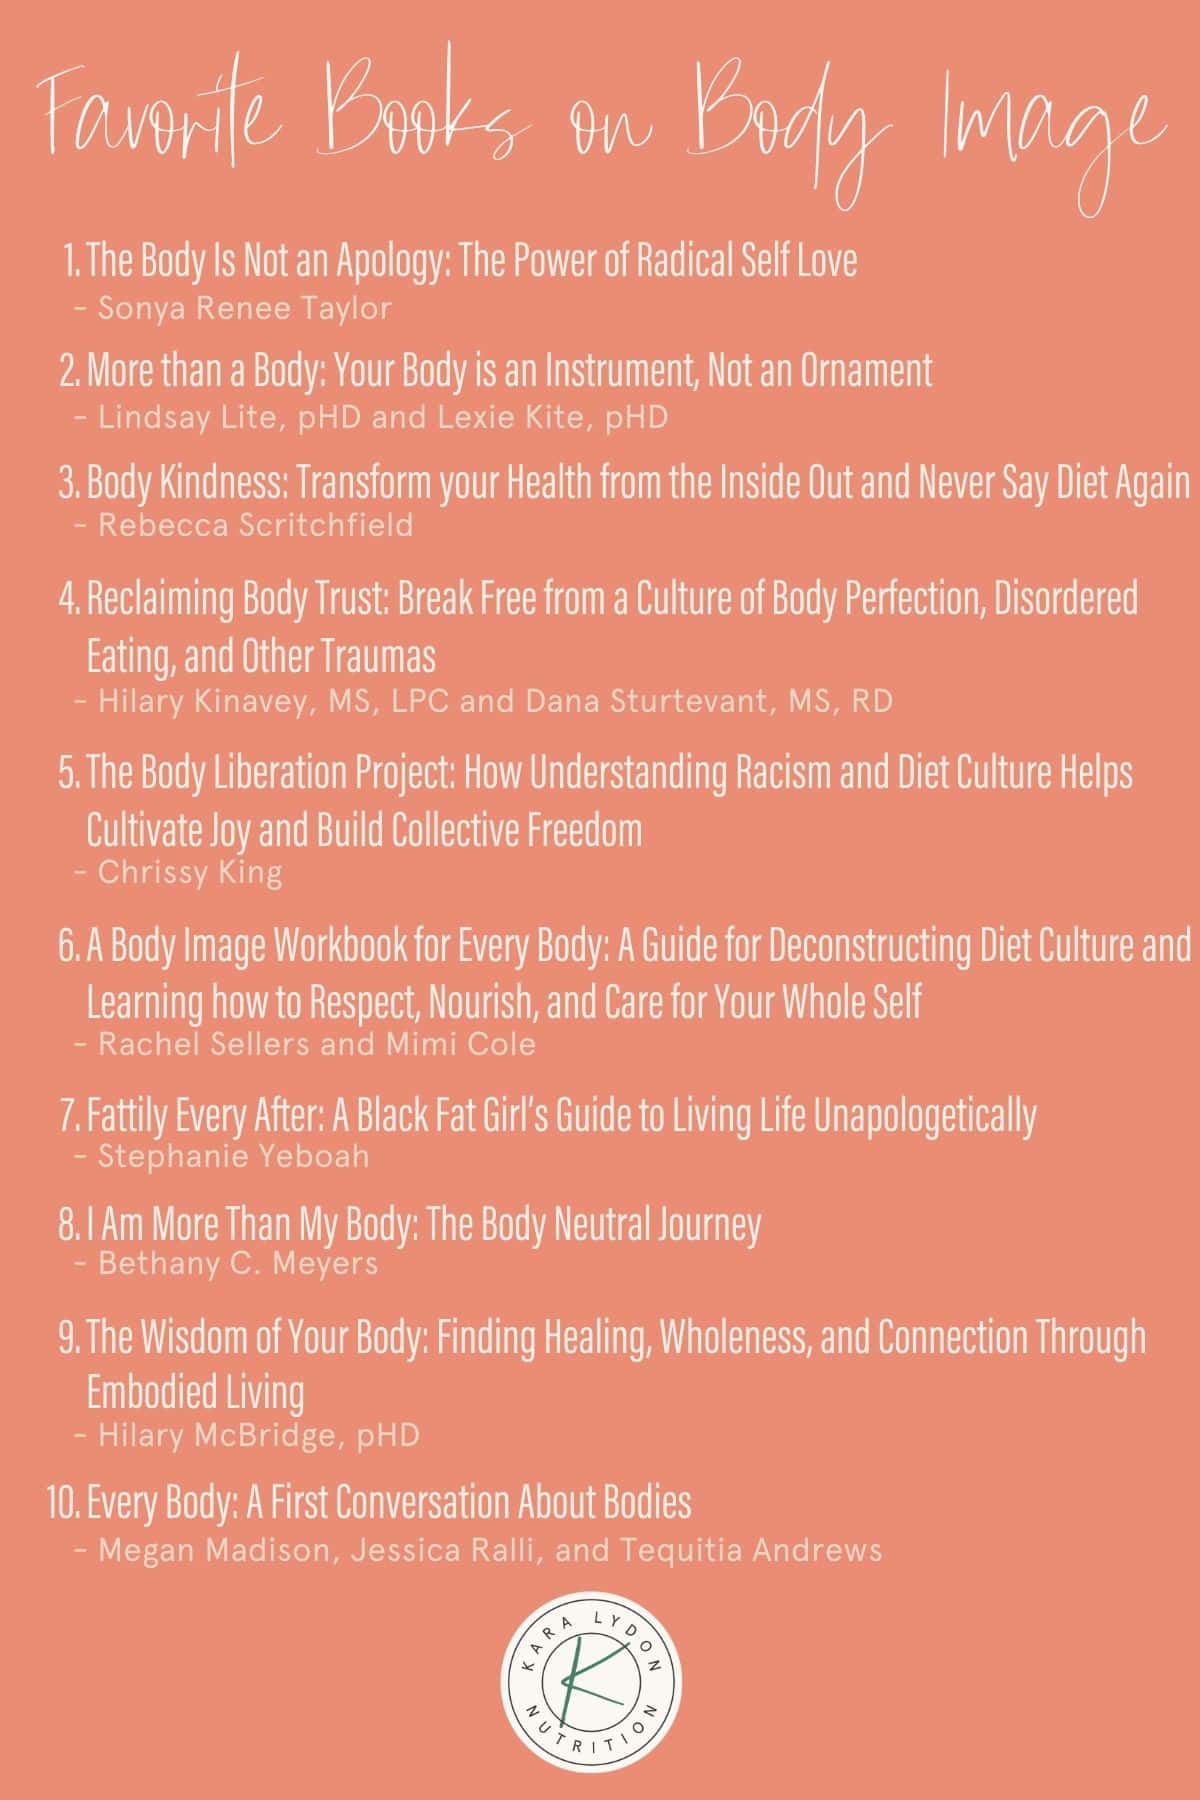 Graphic listing 10 Favorite Books on Body Image.